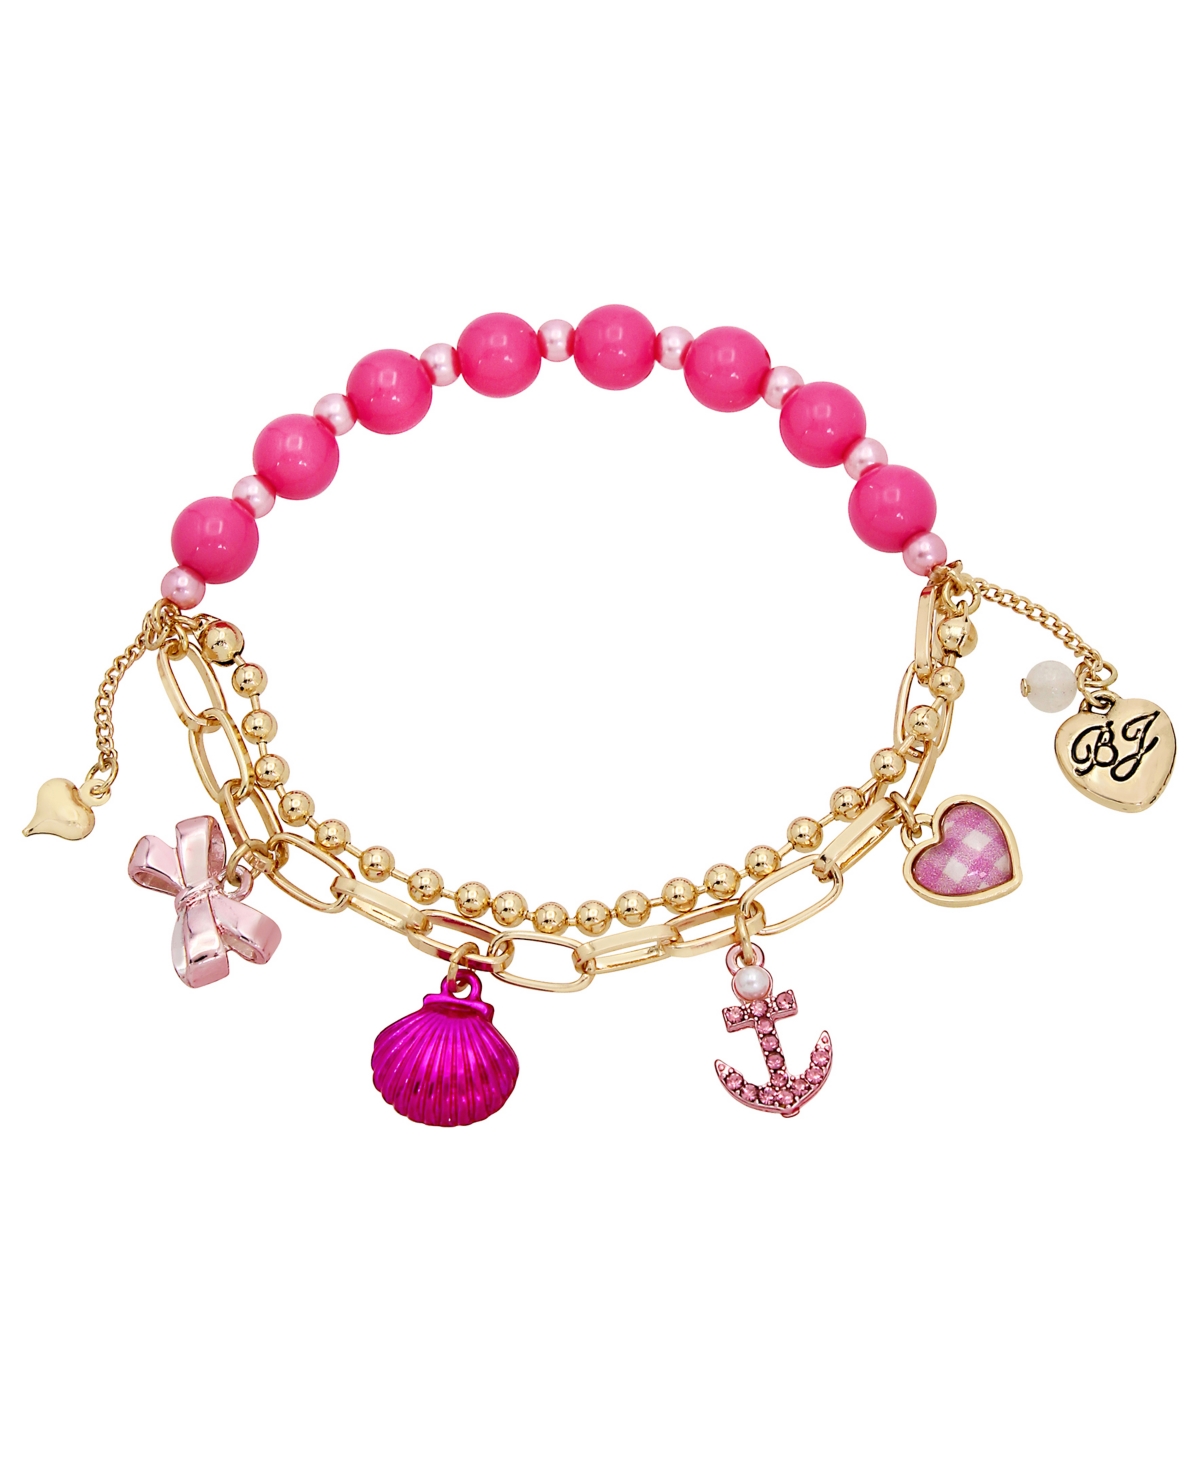 Betsey Johnson Faux Stone Seashell Anchor Charm Stretch Bracelet In Pink,gold